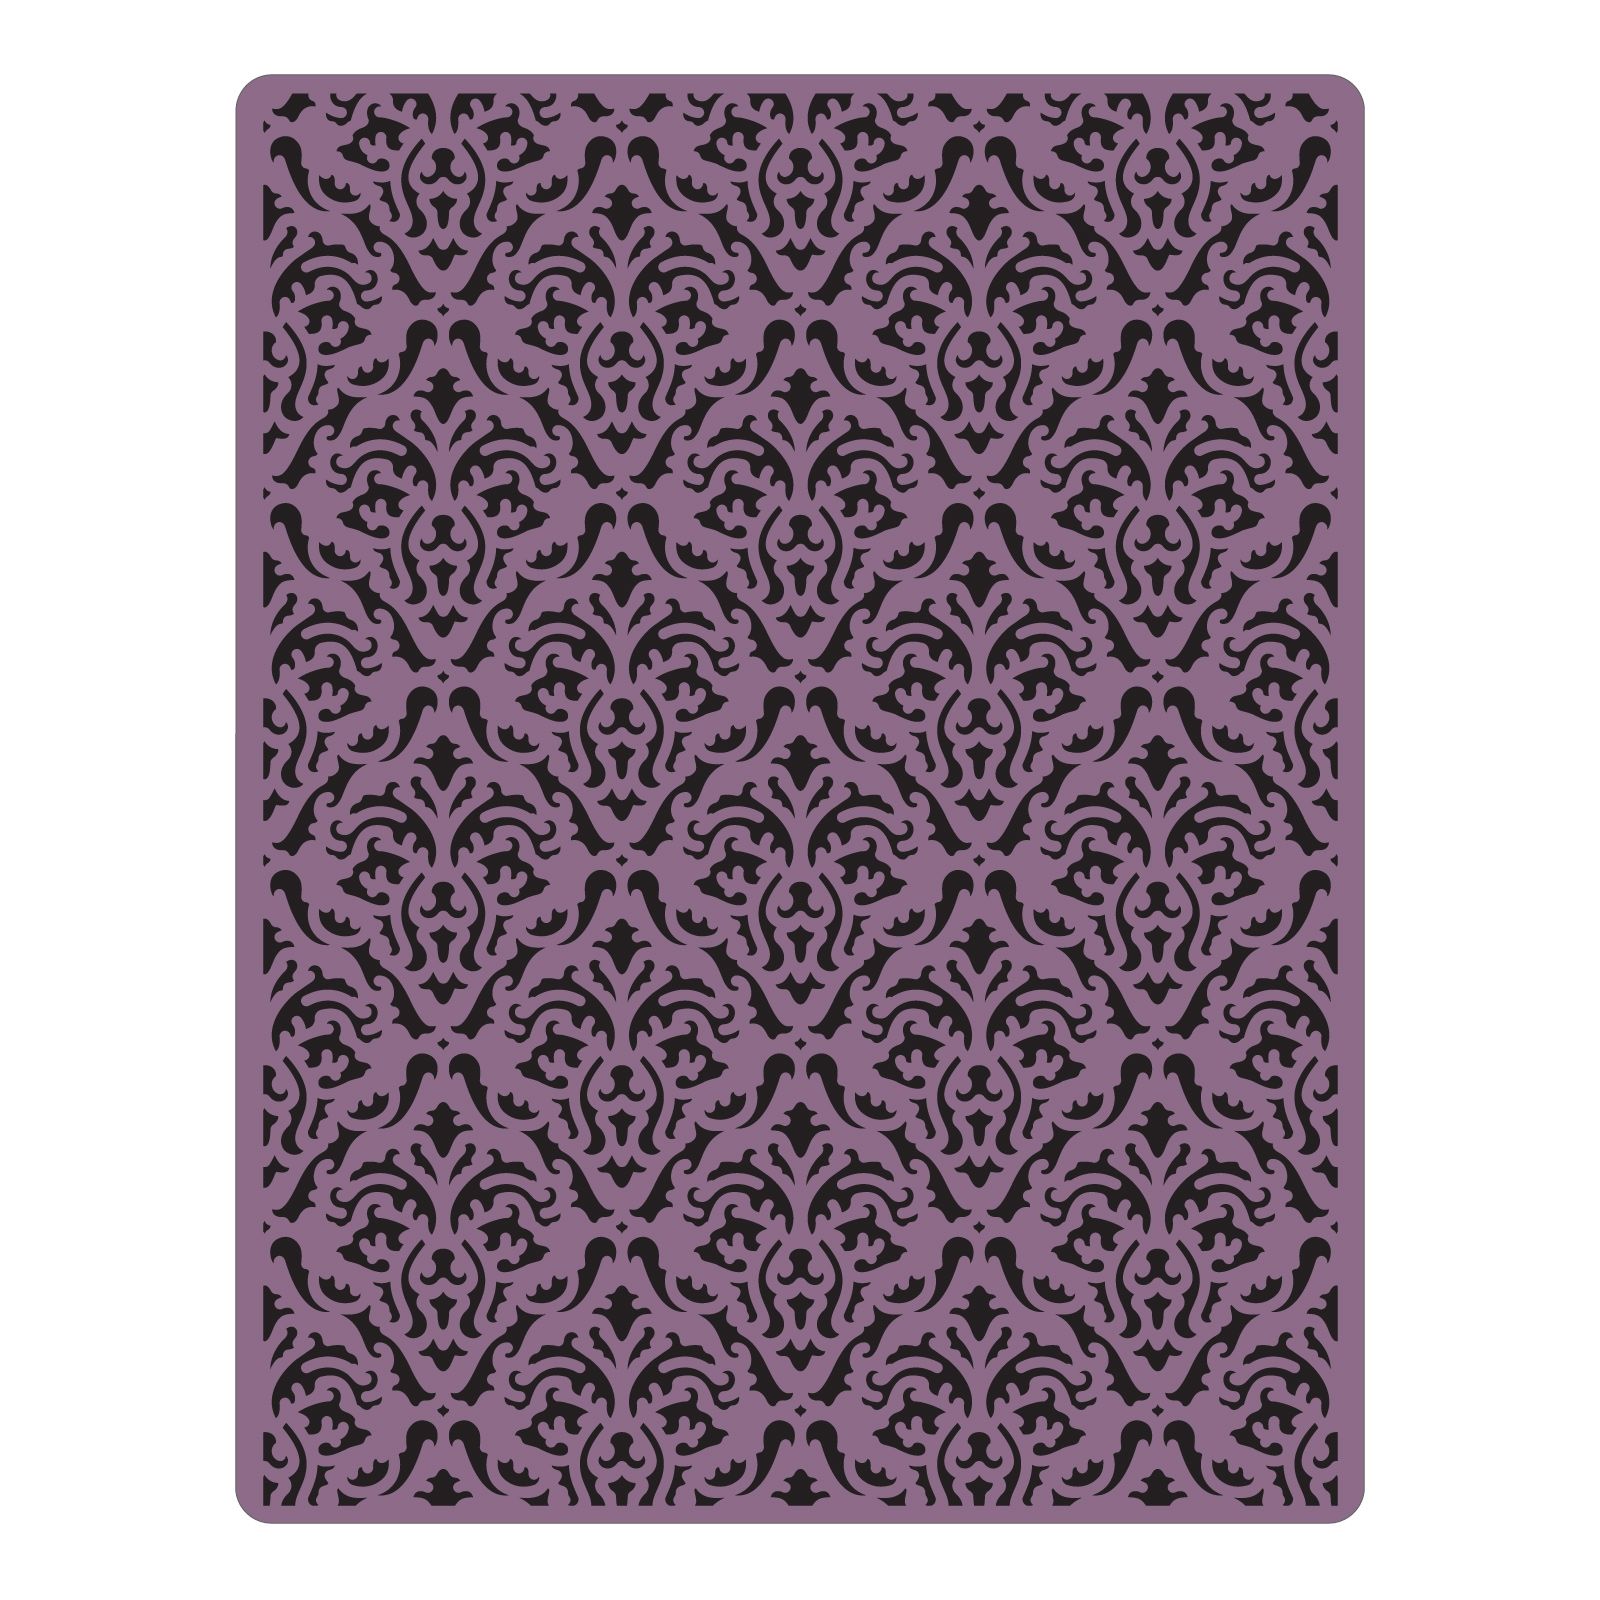 Sizzix Texture Fades A2 Embossing Folder By Tim Holtz - Damast